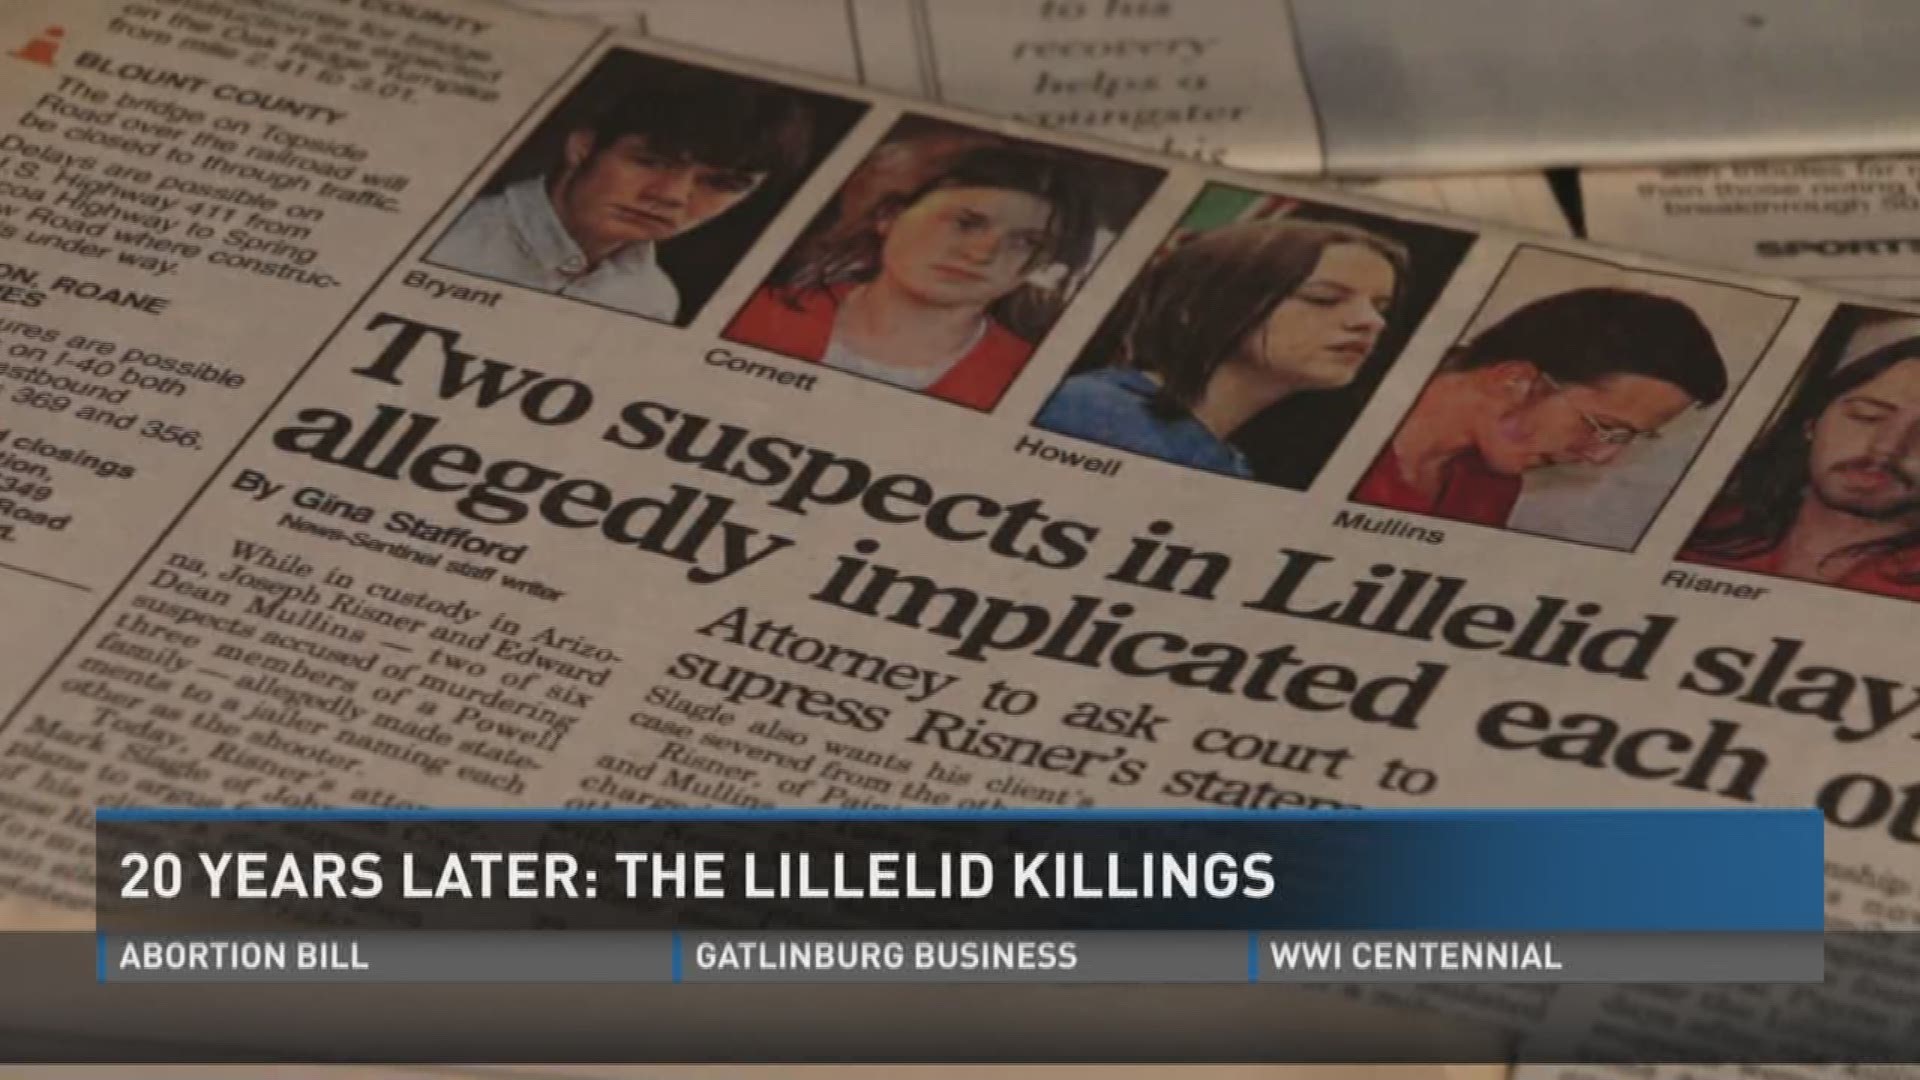 April 6, 2017: The Lillelid murders left their mark on the hearts of people in East Tennessee. Twenty years ago, a young family was the target of a grim crime.